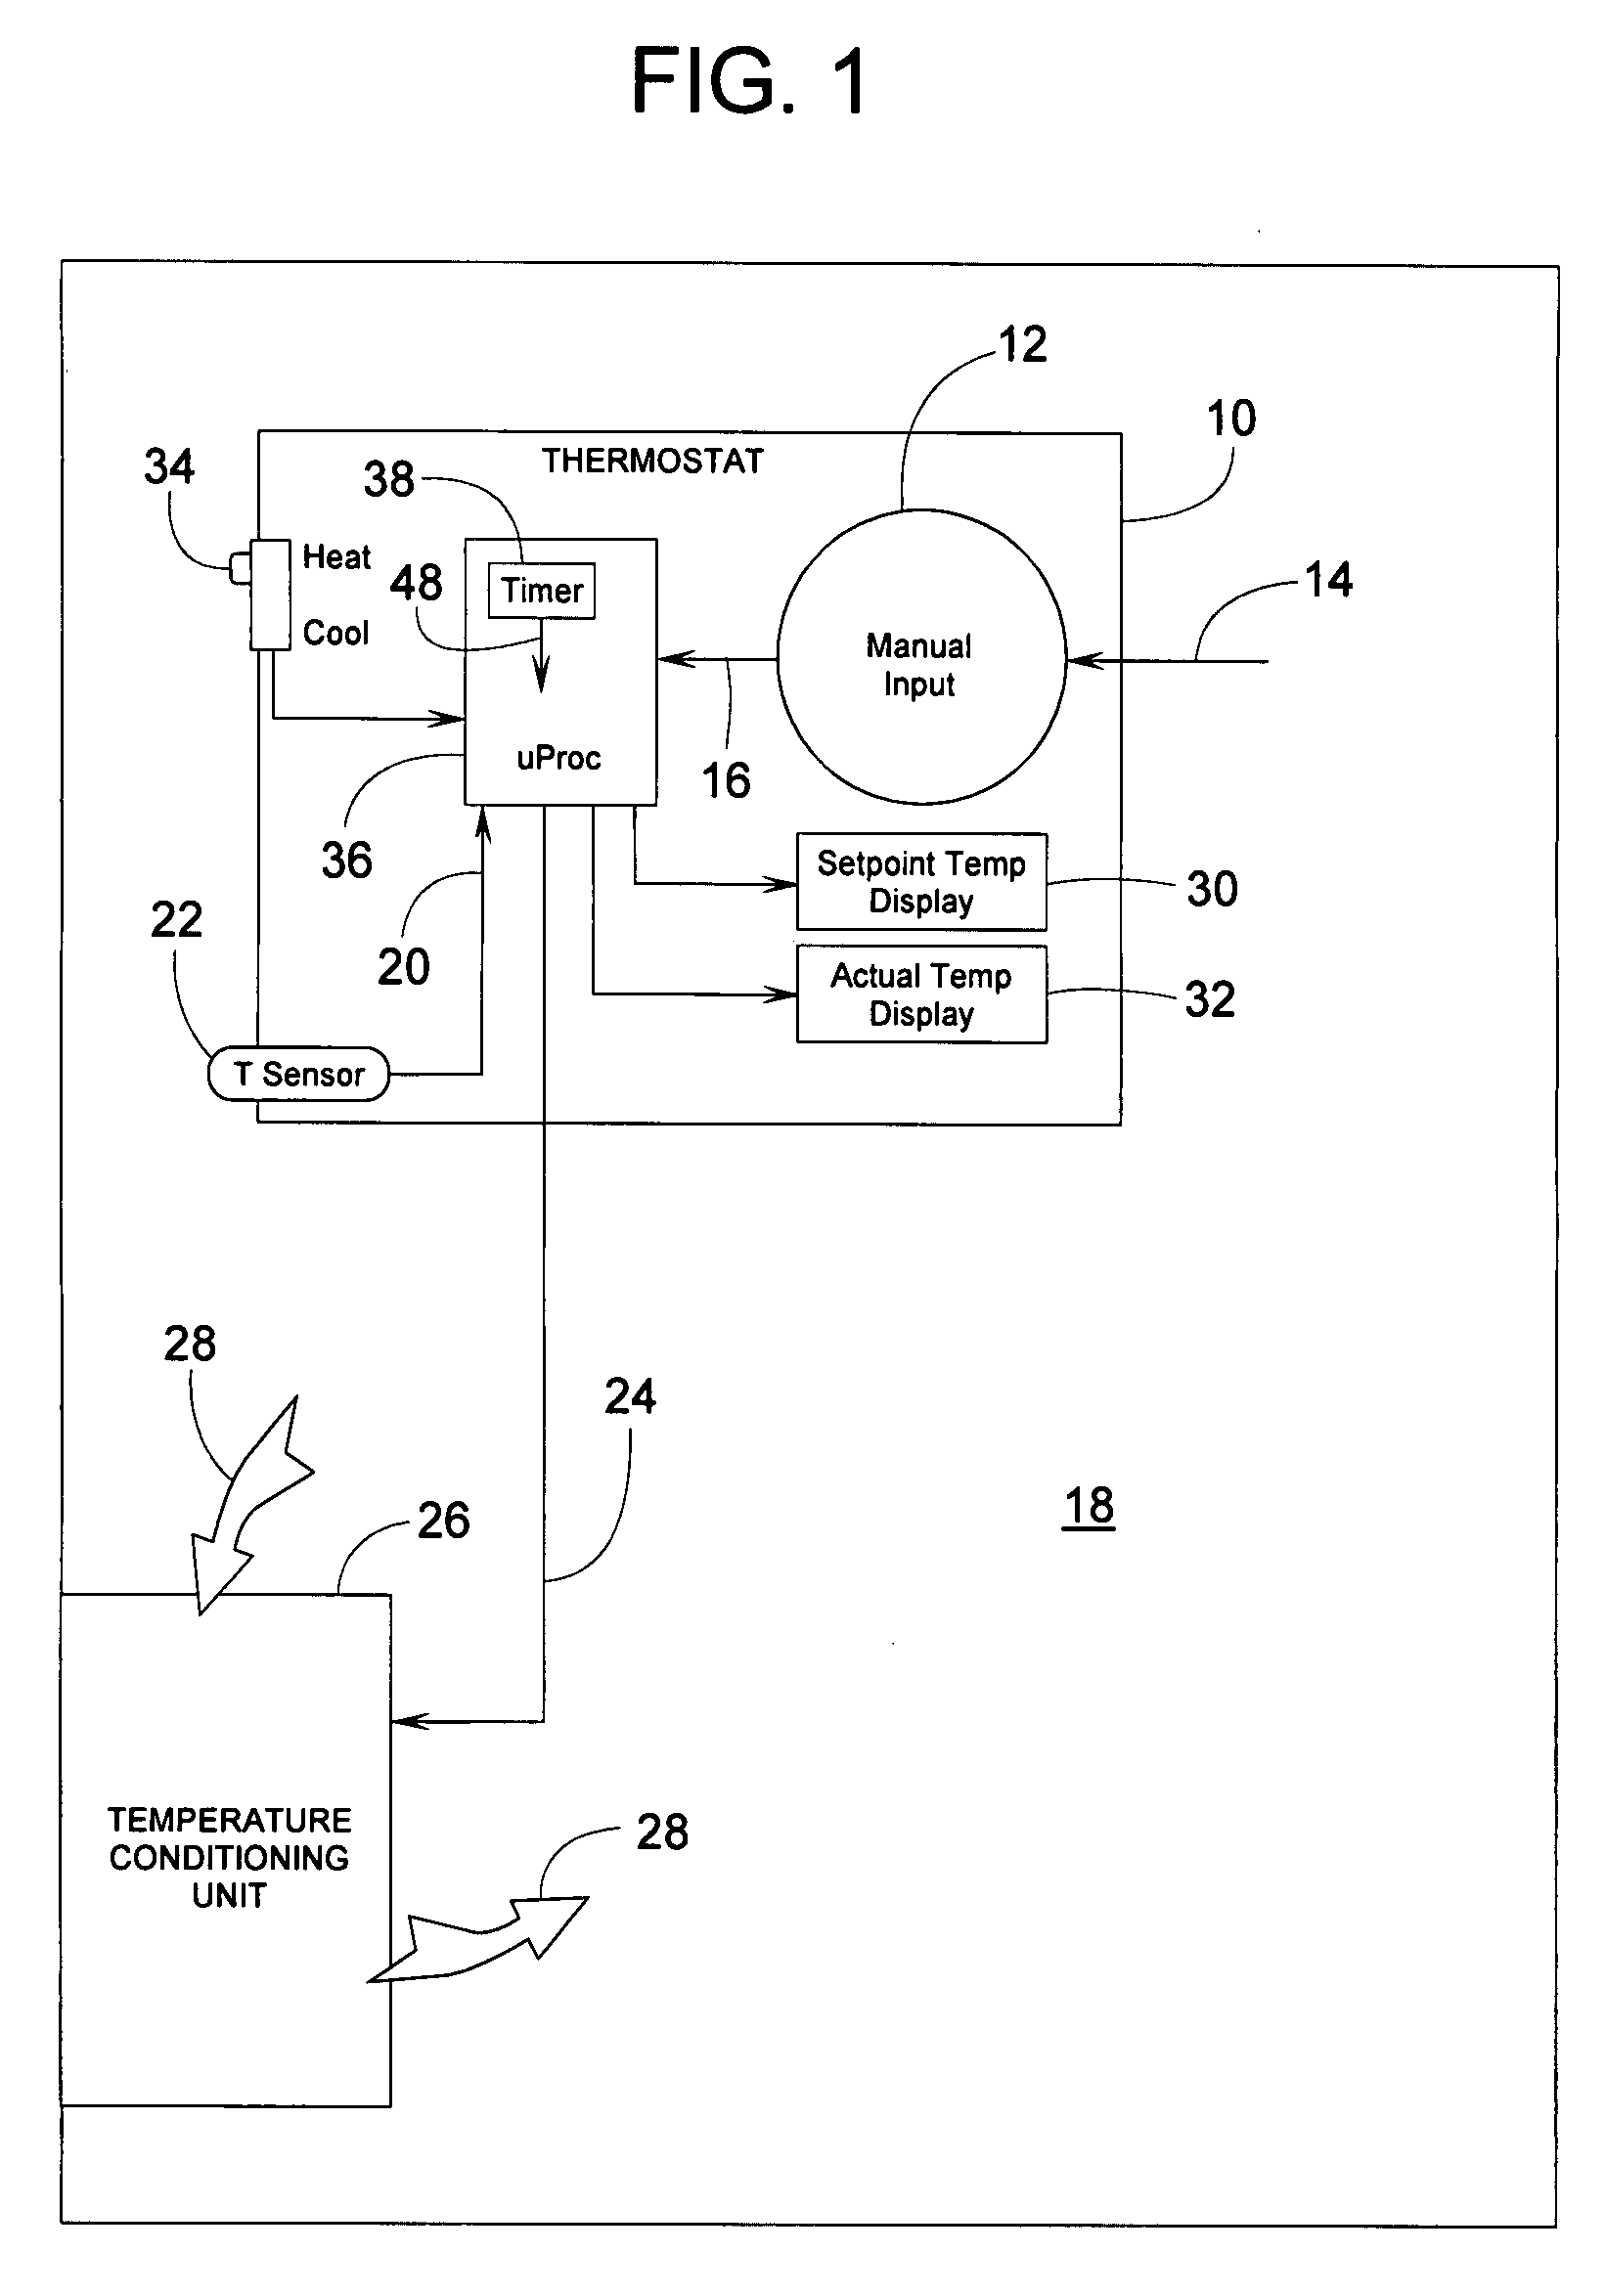 Self-programmable thermostat